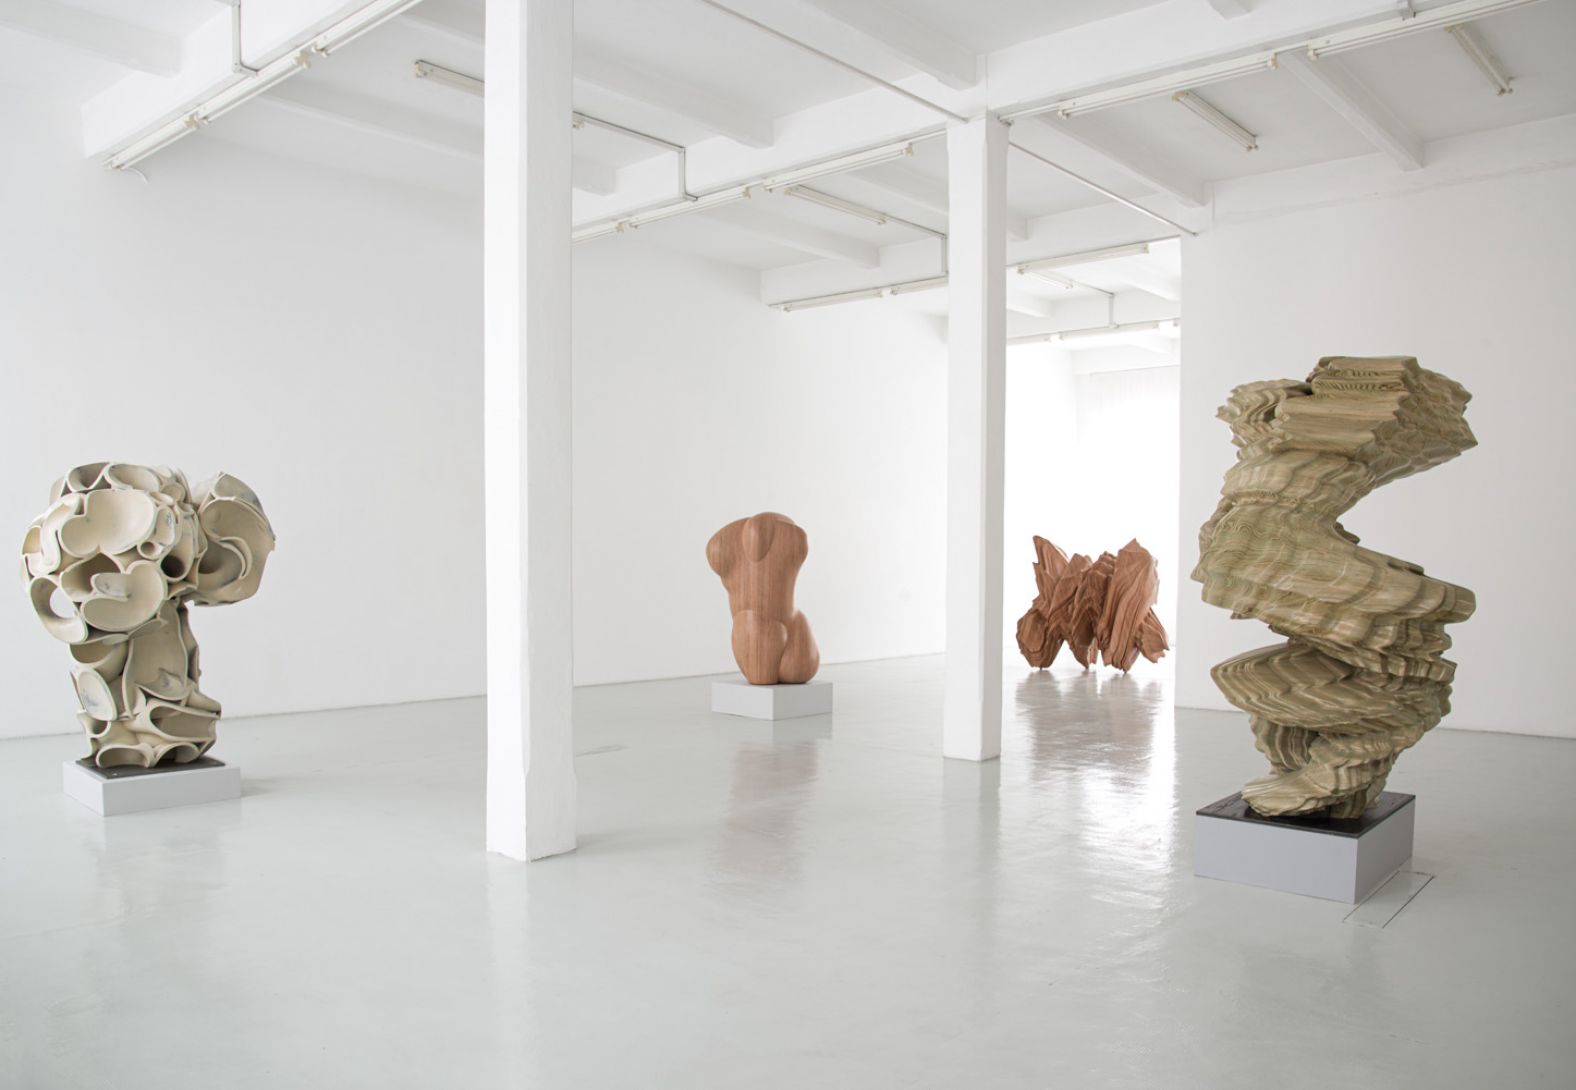 Tony Cragg "In No Time" at Tucci Russo Gallery from 10 October 2021 till 31 January 2022